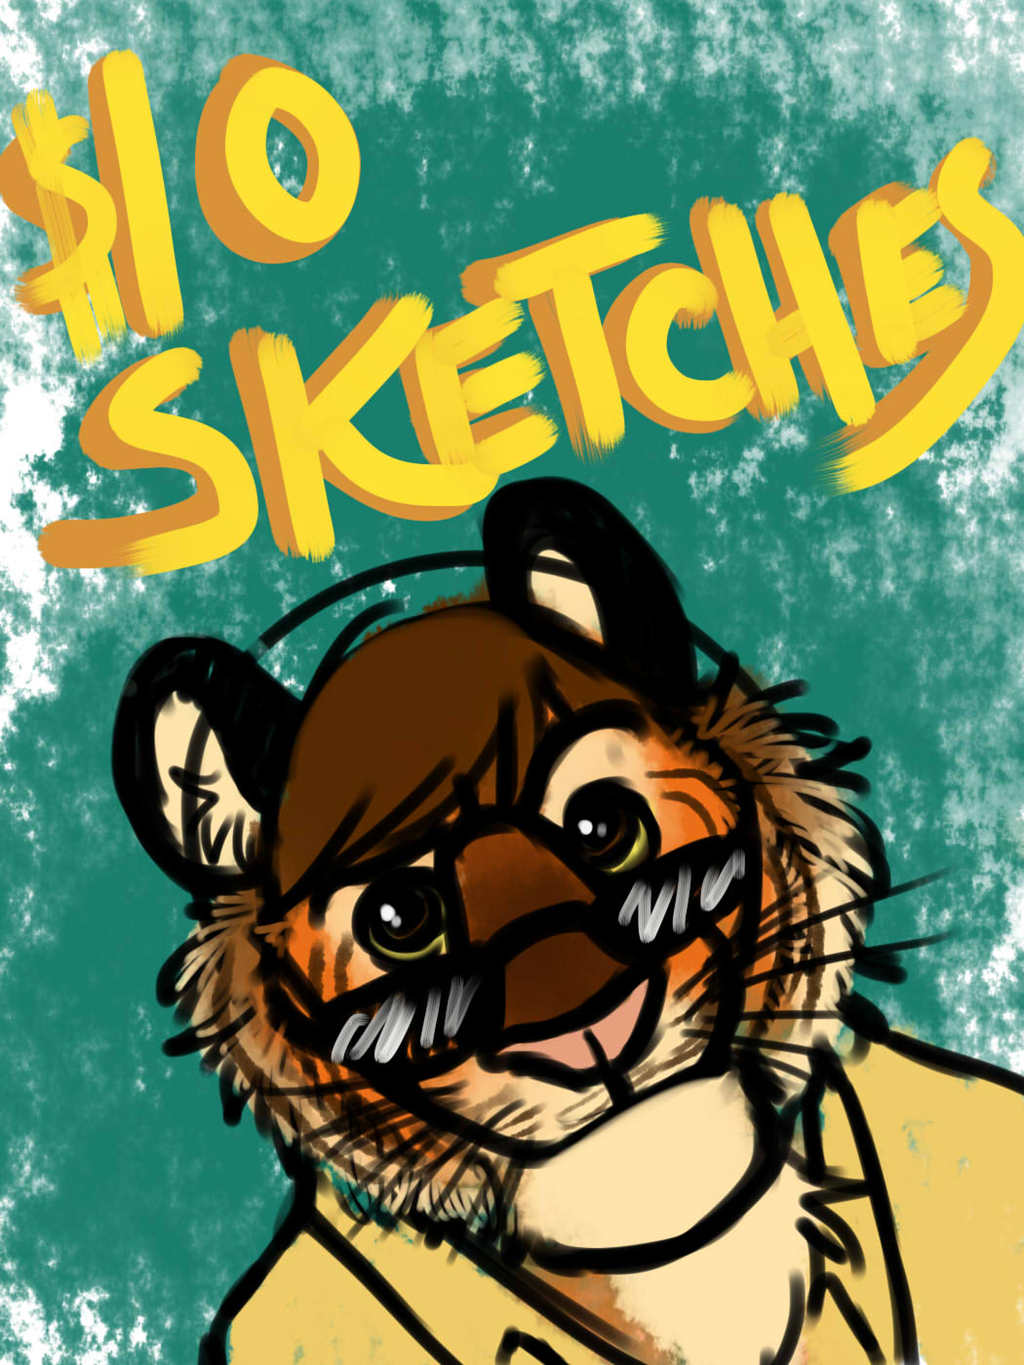 $10 Sketches!